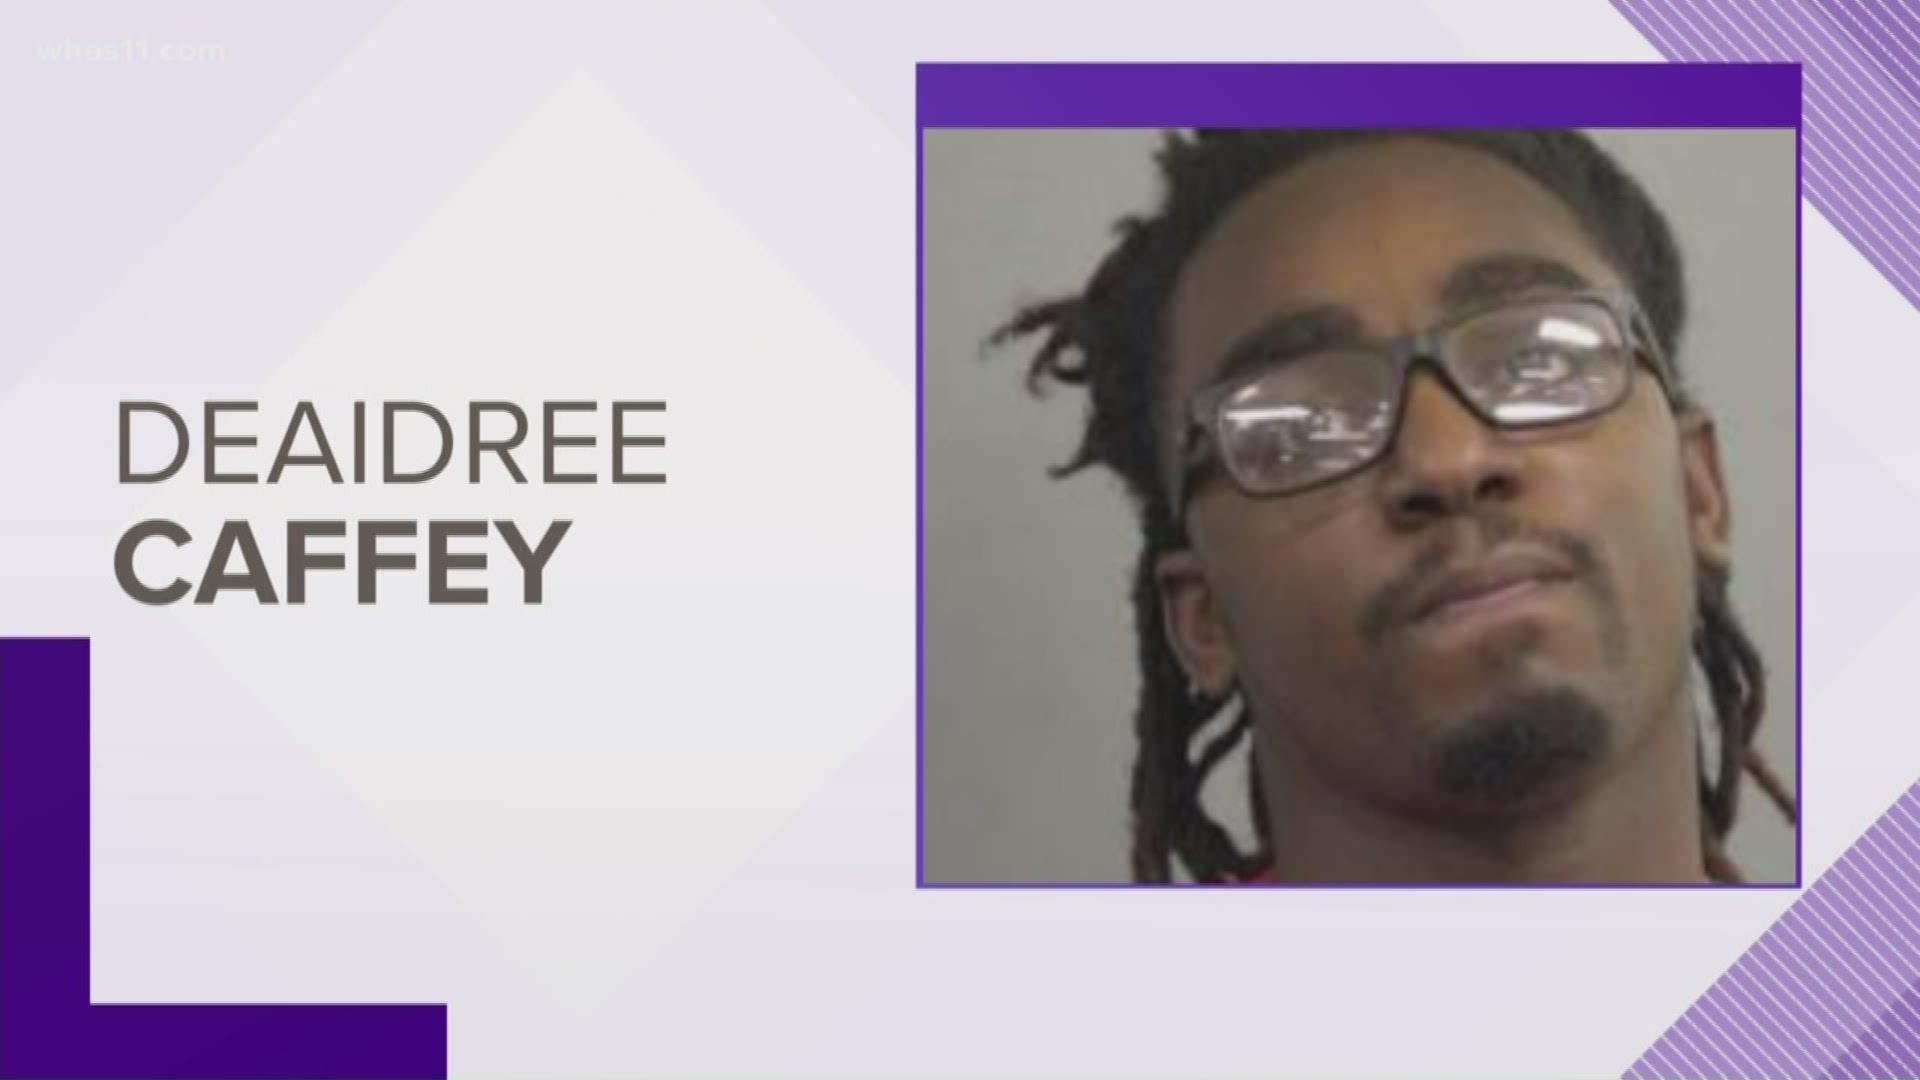 According to an arrest report 22-year-old Deairdree Caffey met two men from Salt Lake City while playing cards at Horseshoe Casino.